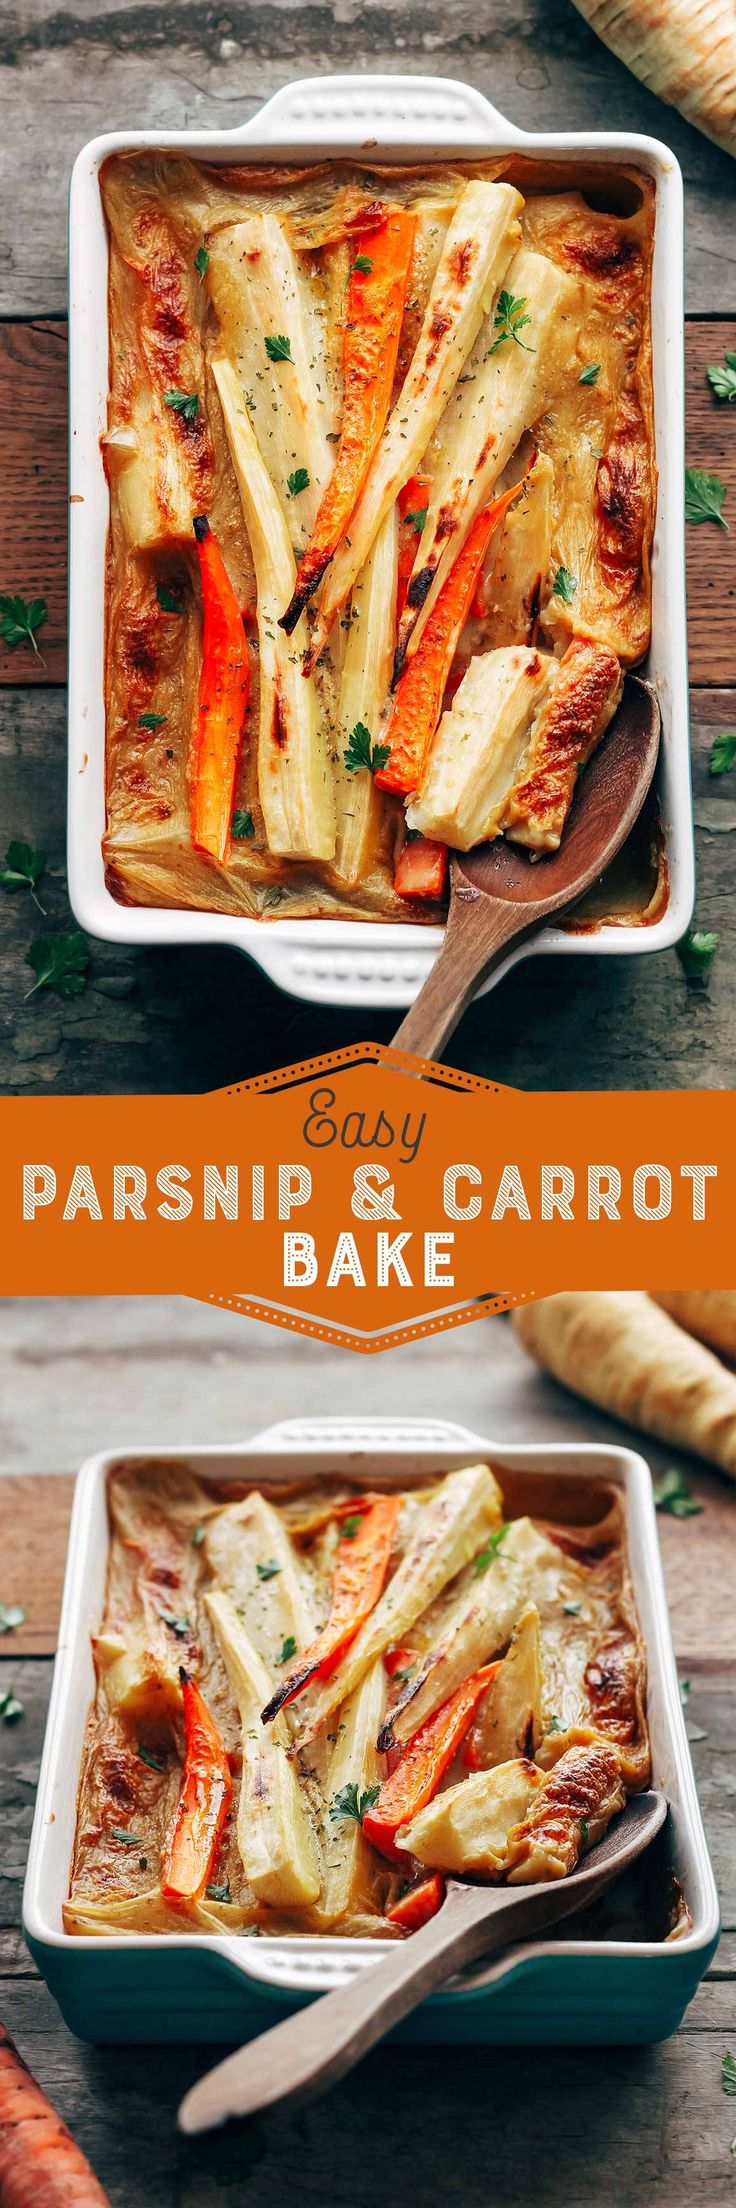 Parsnip And Carrot Casserole